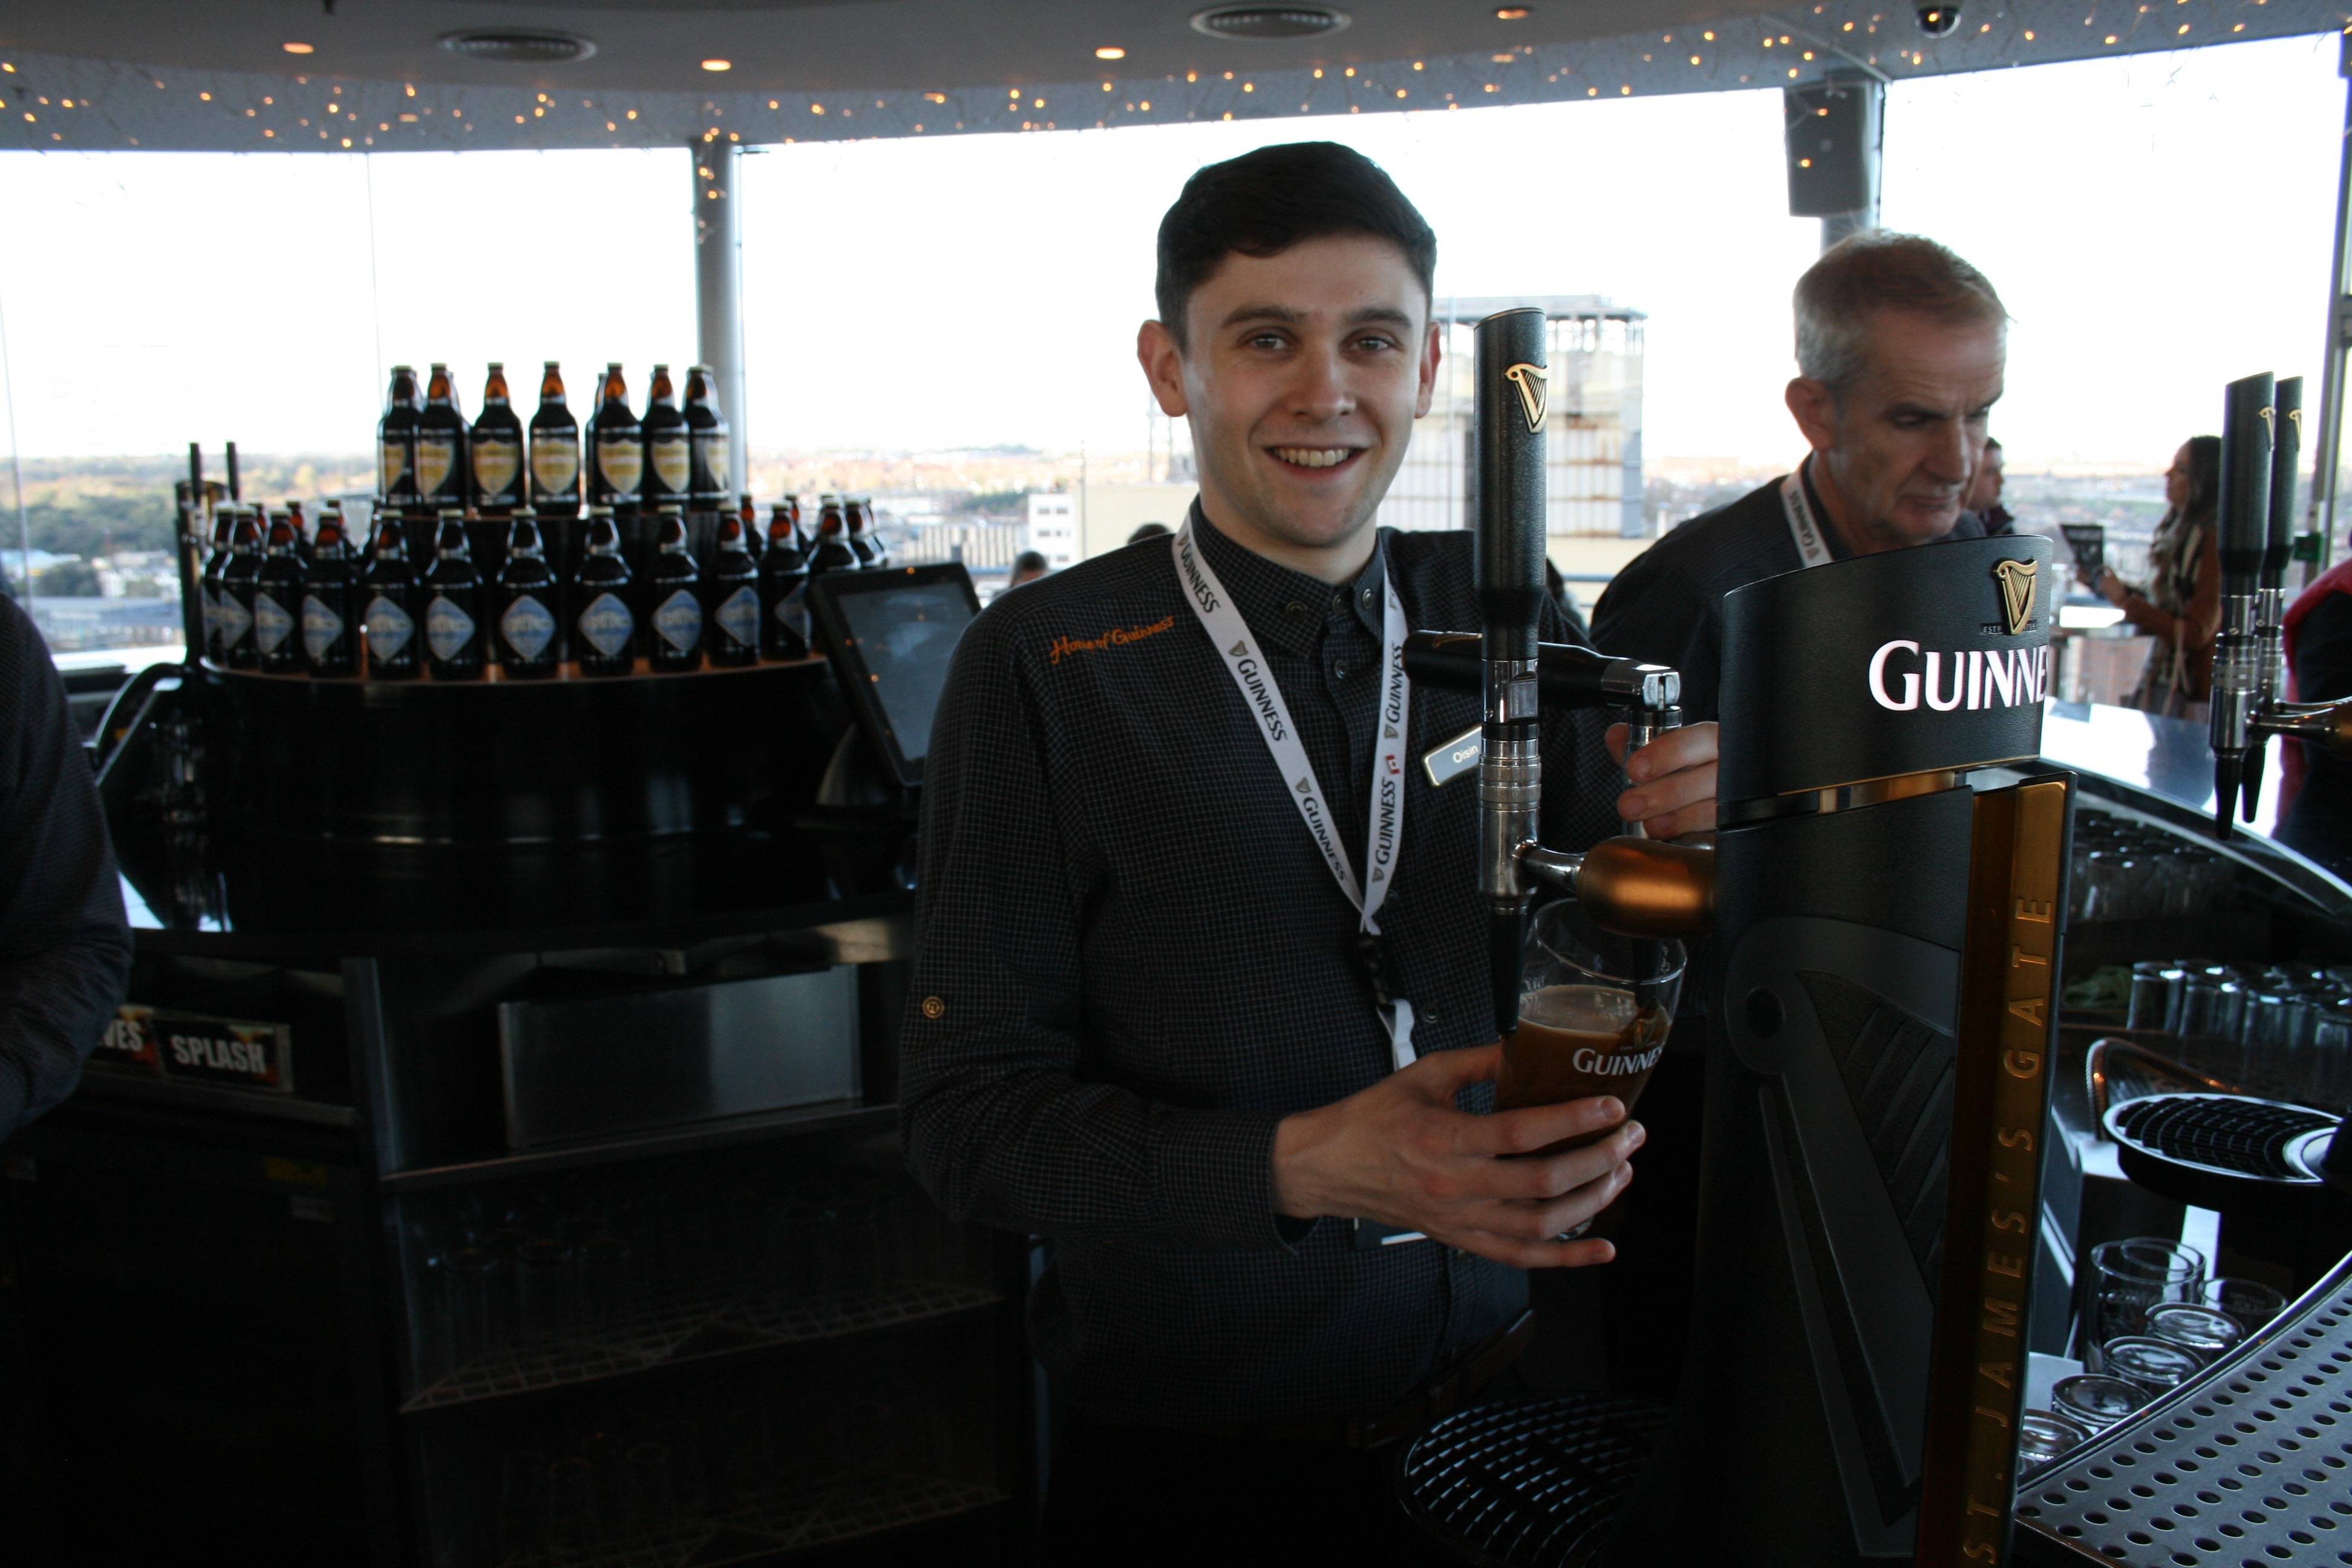 Watching my first pour of Guinness take place at the Gravity Bar.